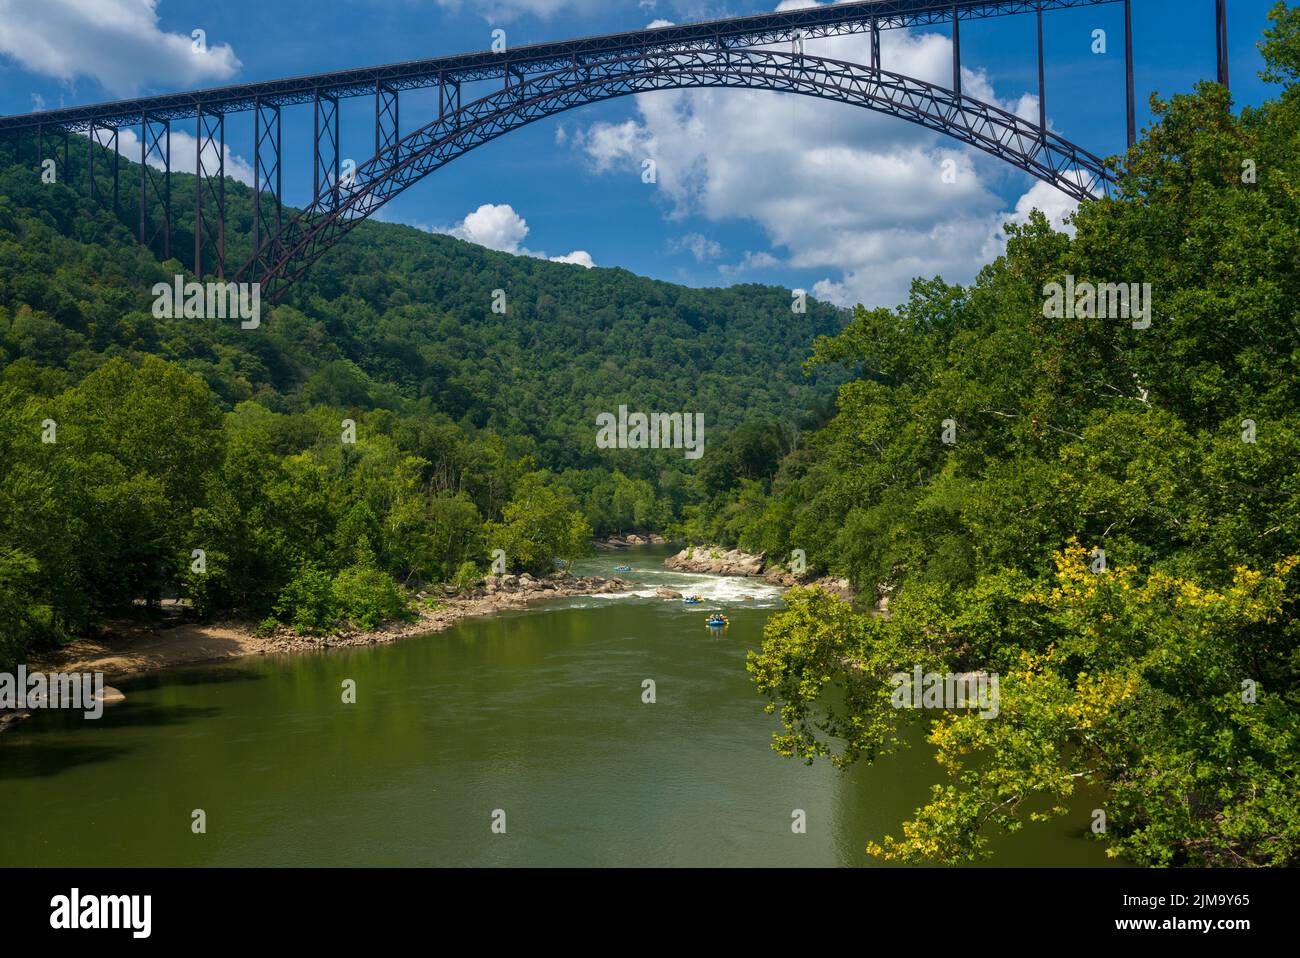 Rafters at the New River Gorge Bridge in West Virginia Stock Photo